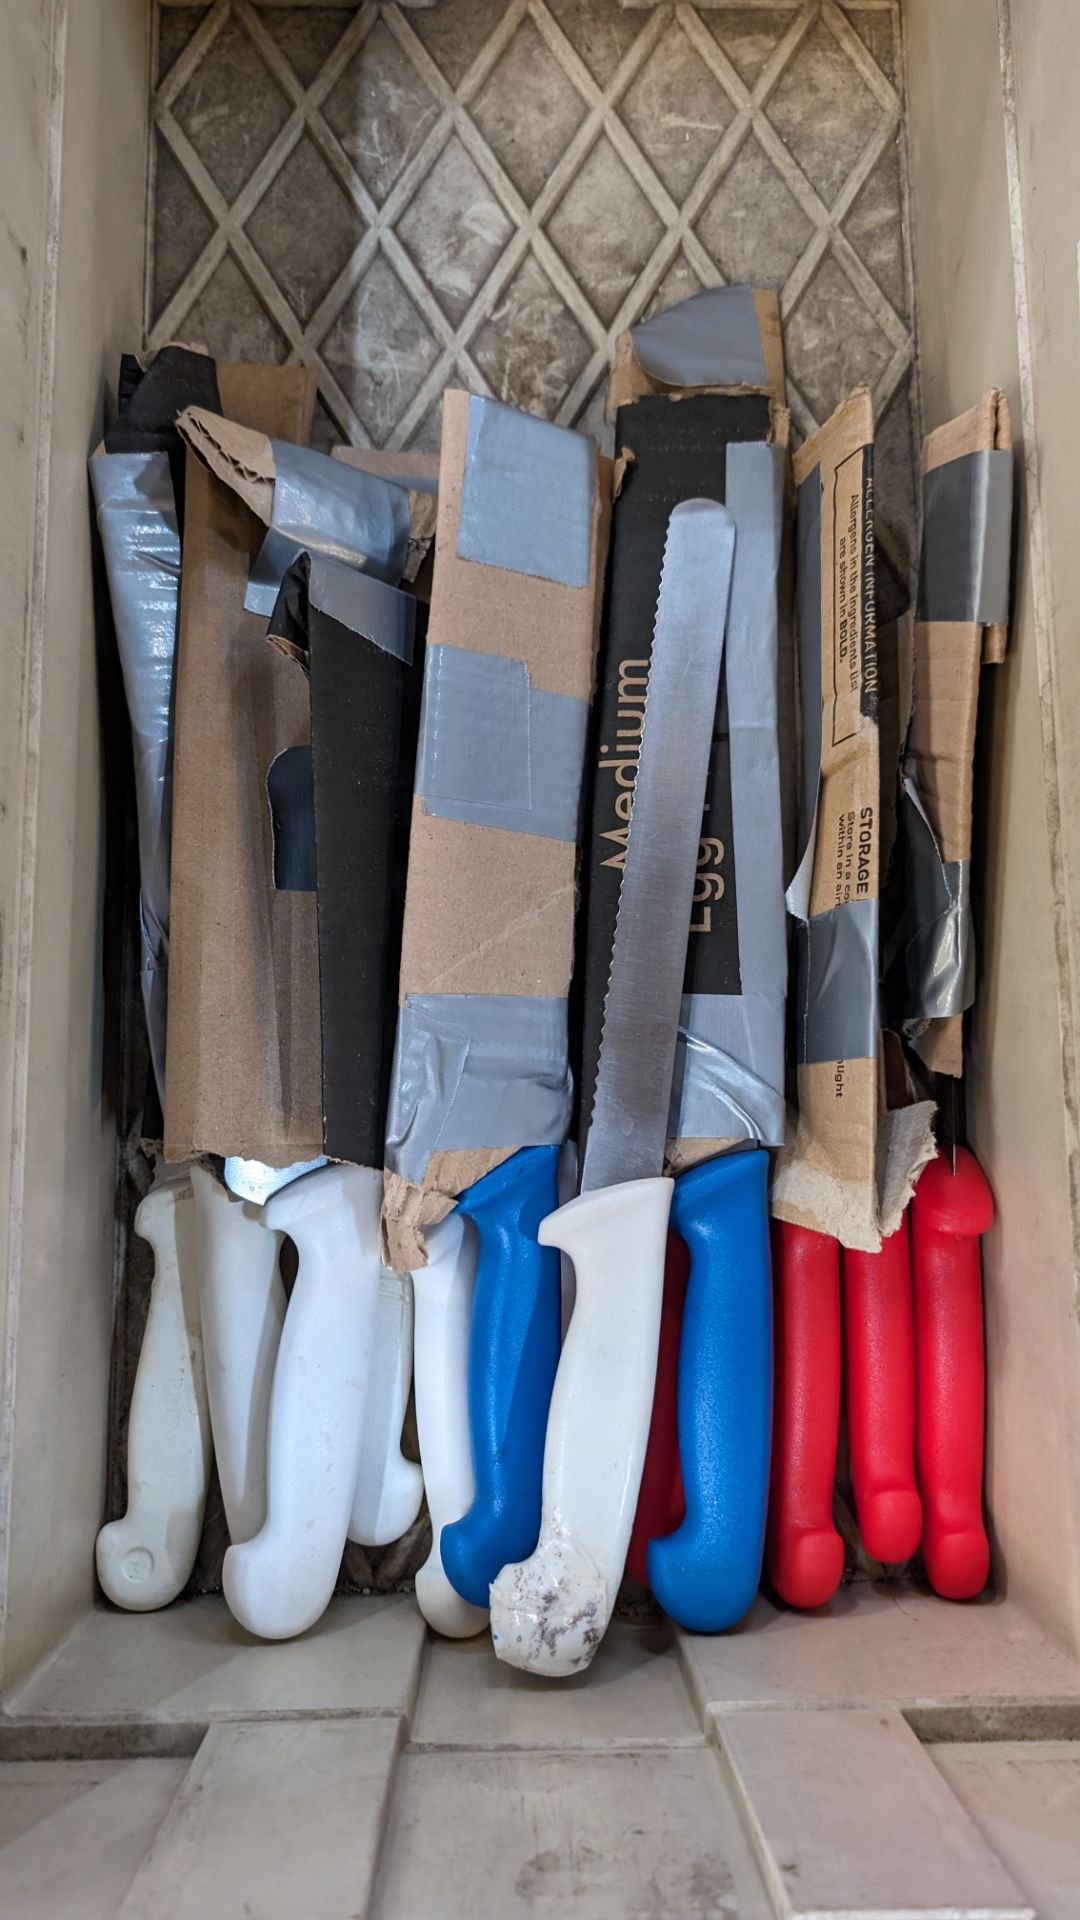 The contents of a crate of chefs knives - Image 4 of 4